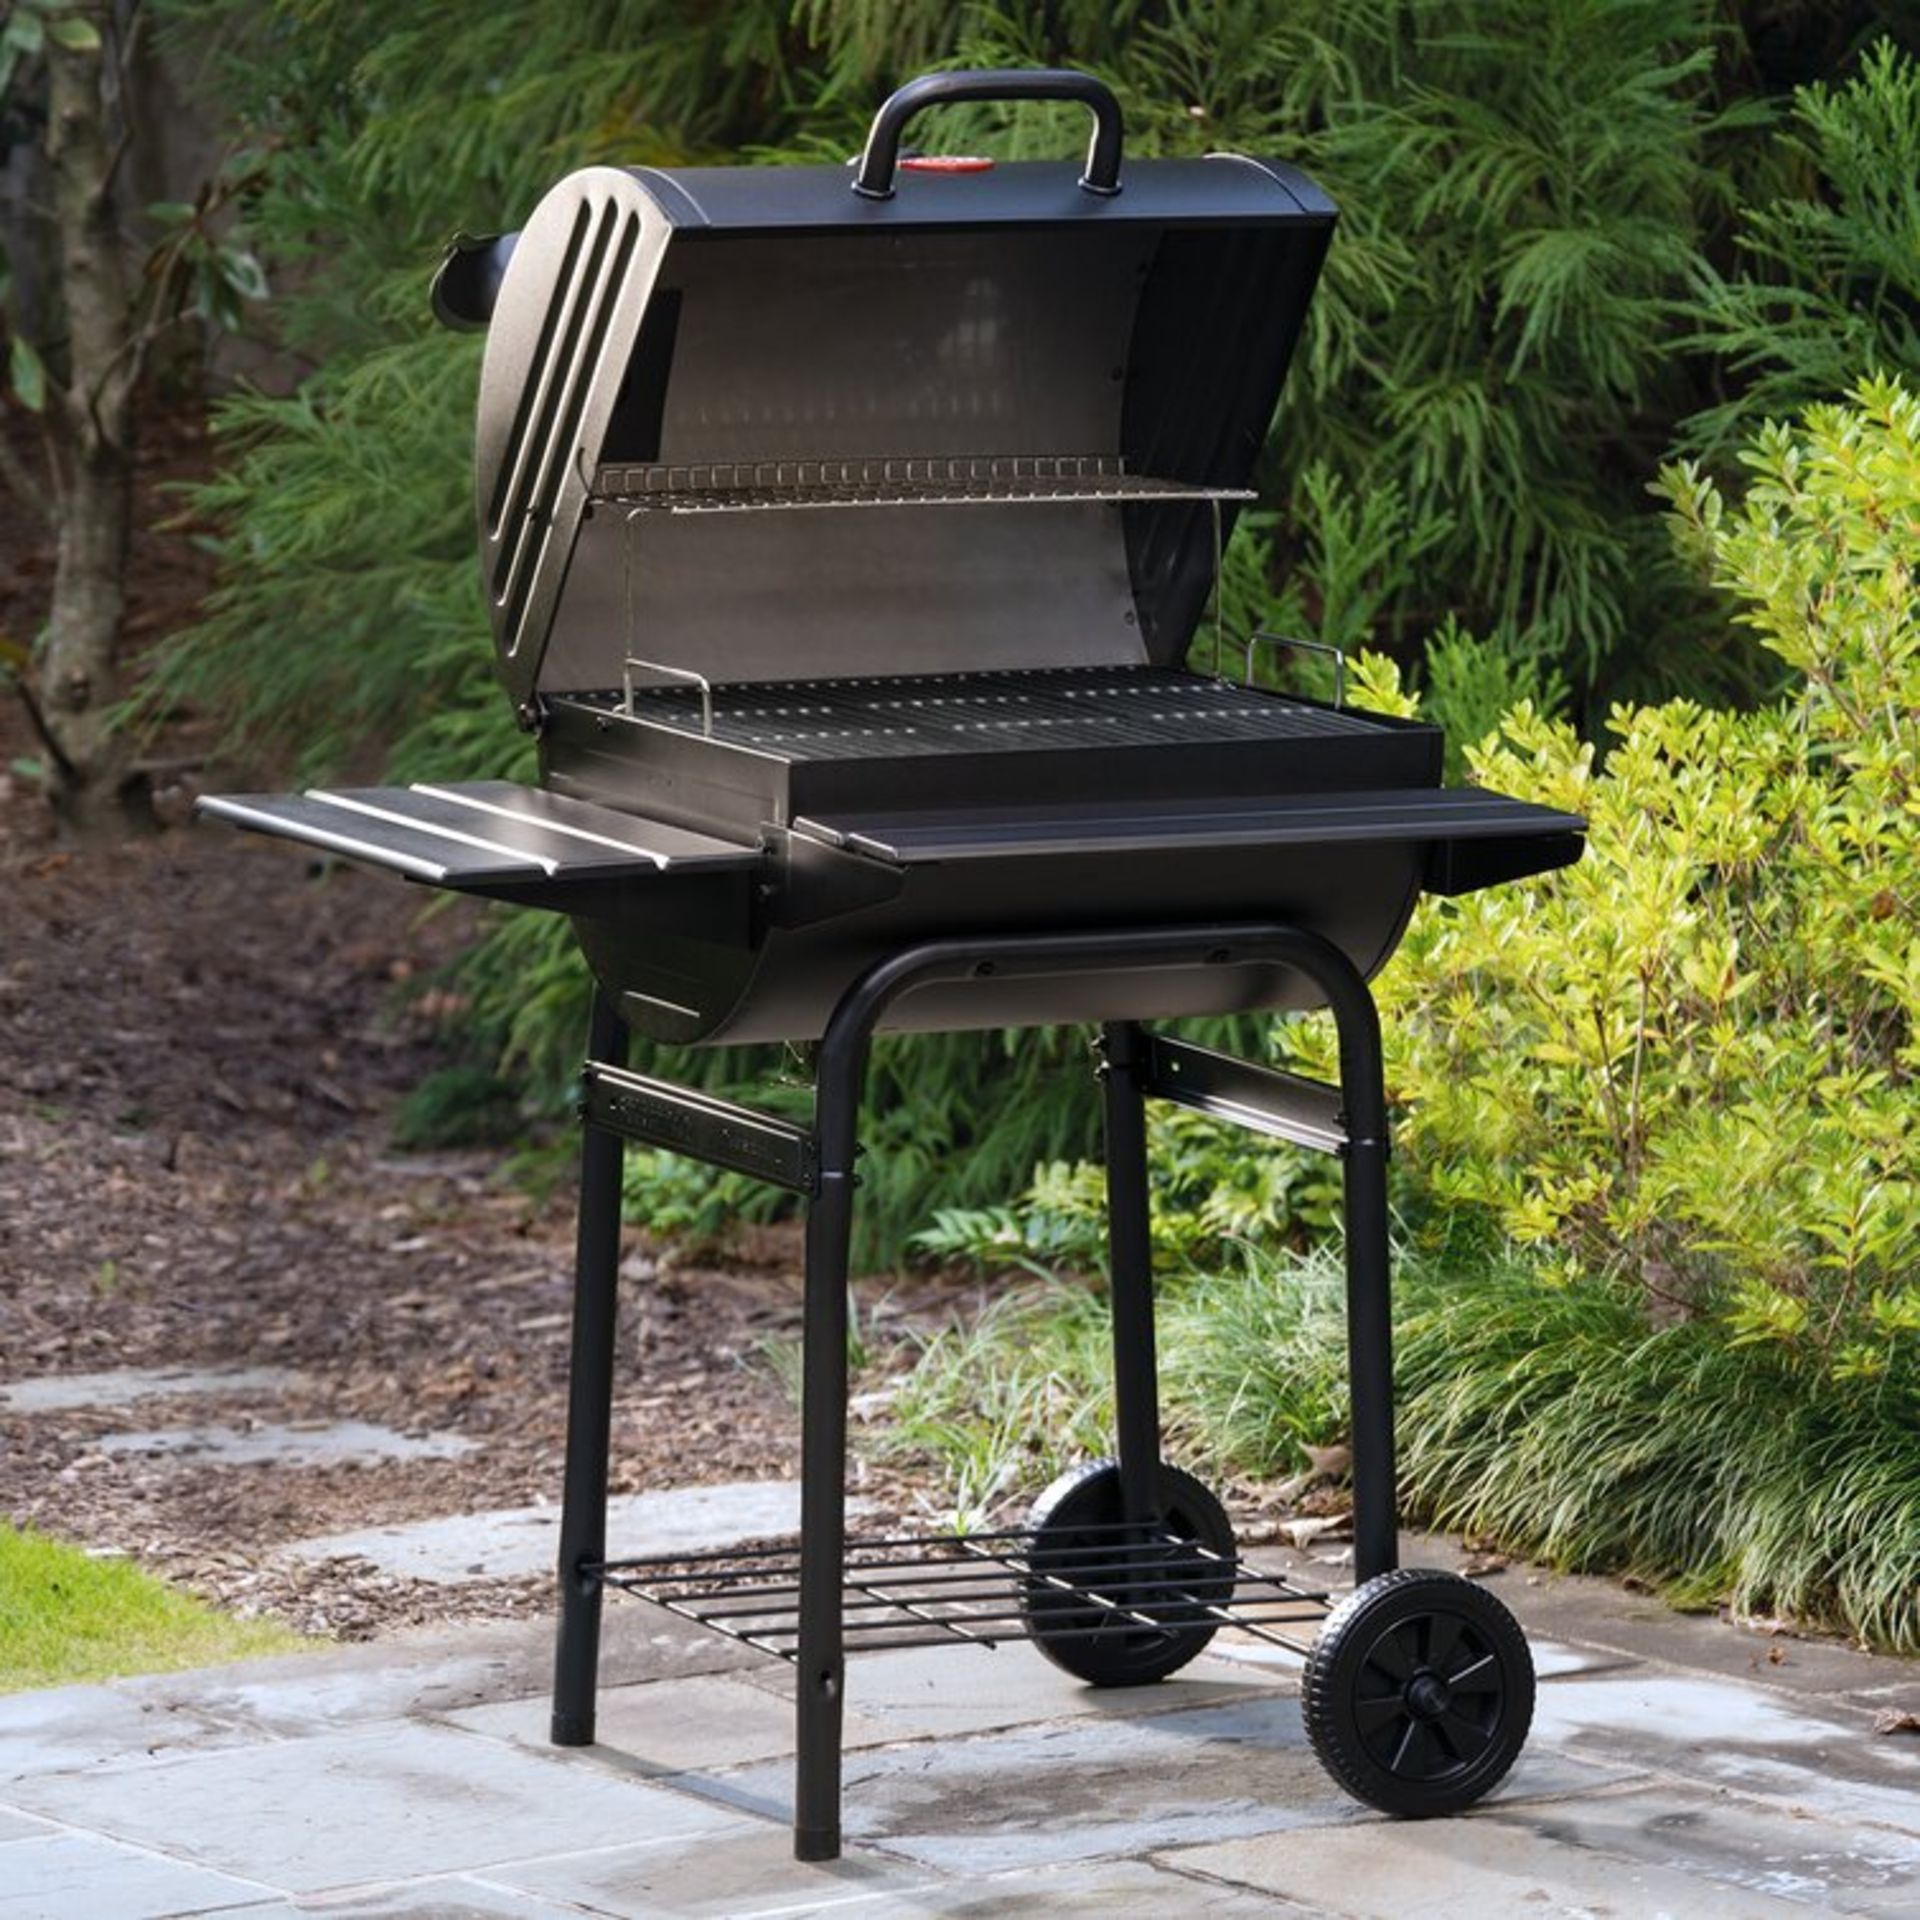 BRAND NEW CHAR-GRILLER 71CM BARREL CHARCOAL BBQ - Image 2 of 5